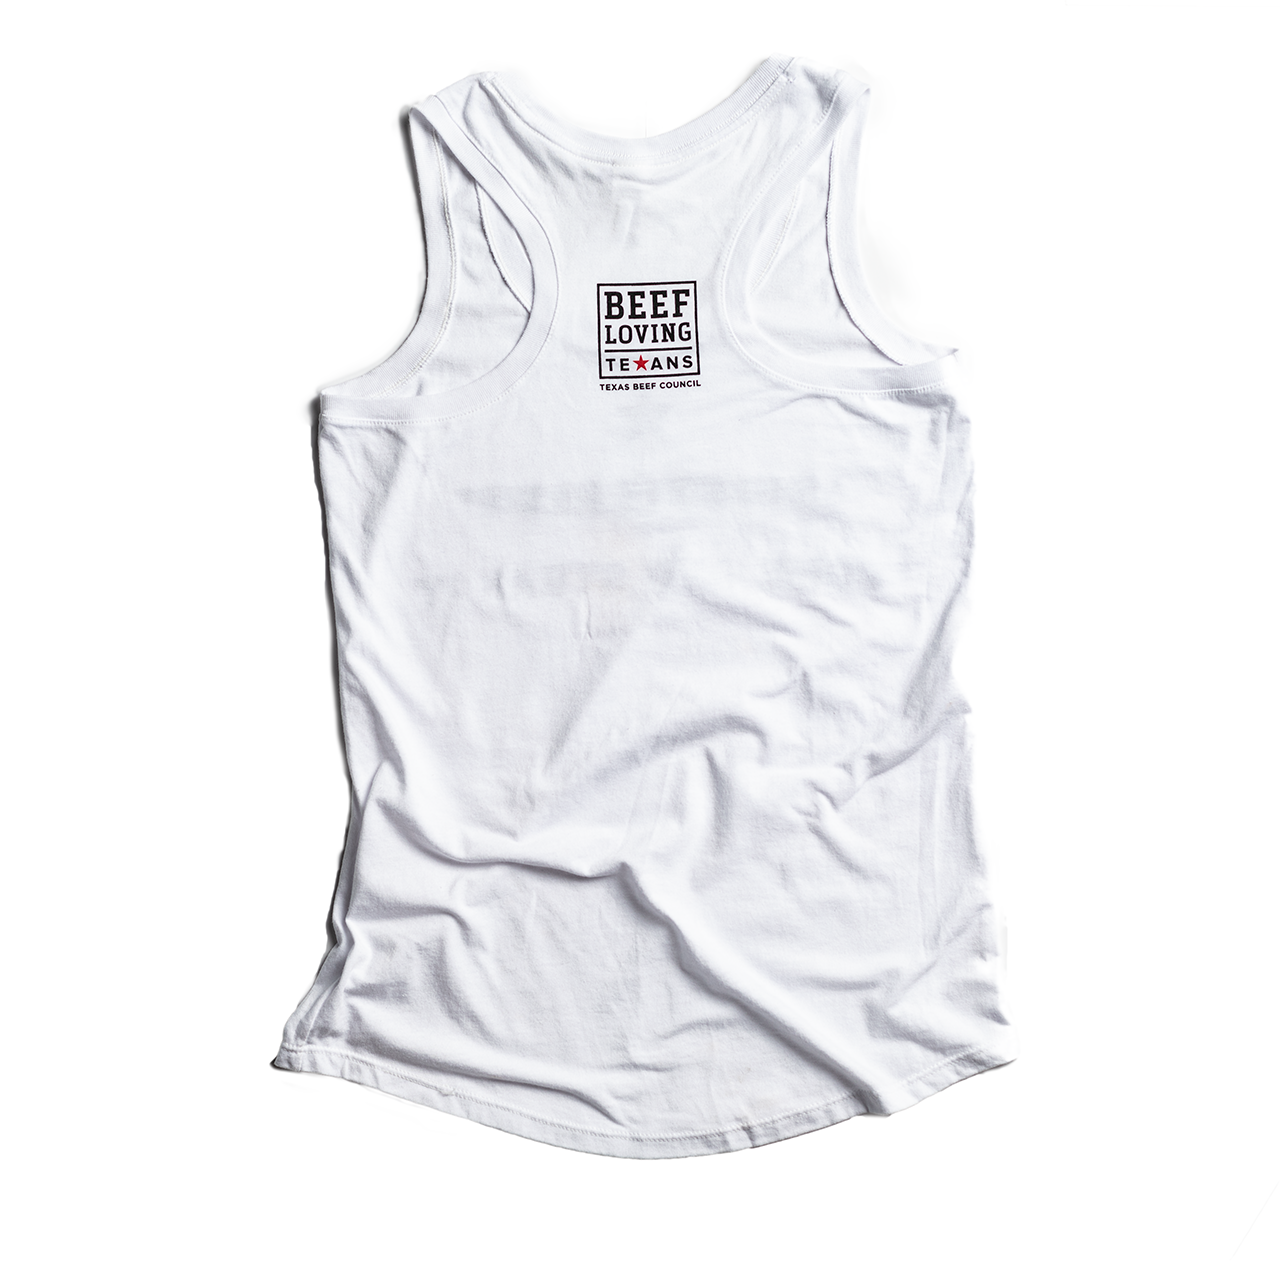 Beef Loving Texans Women's Come and Steak it Tank